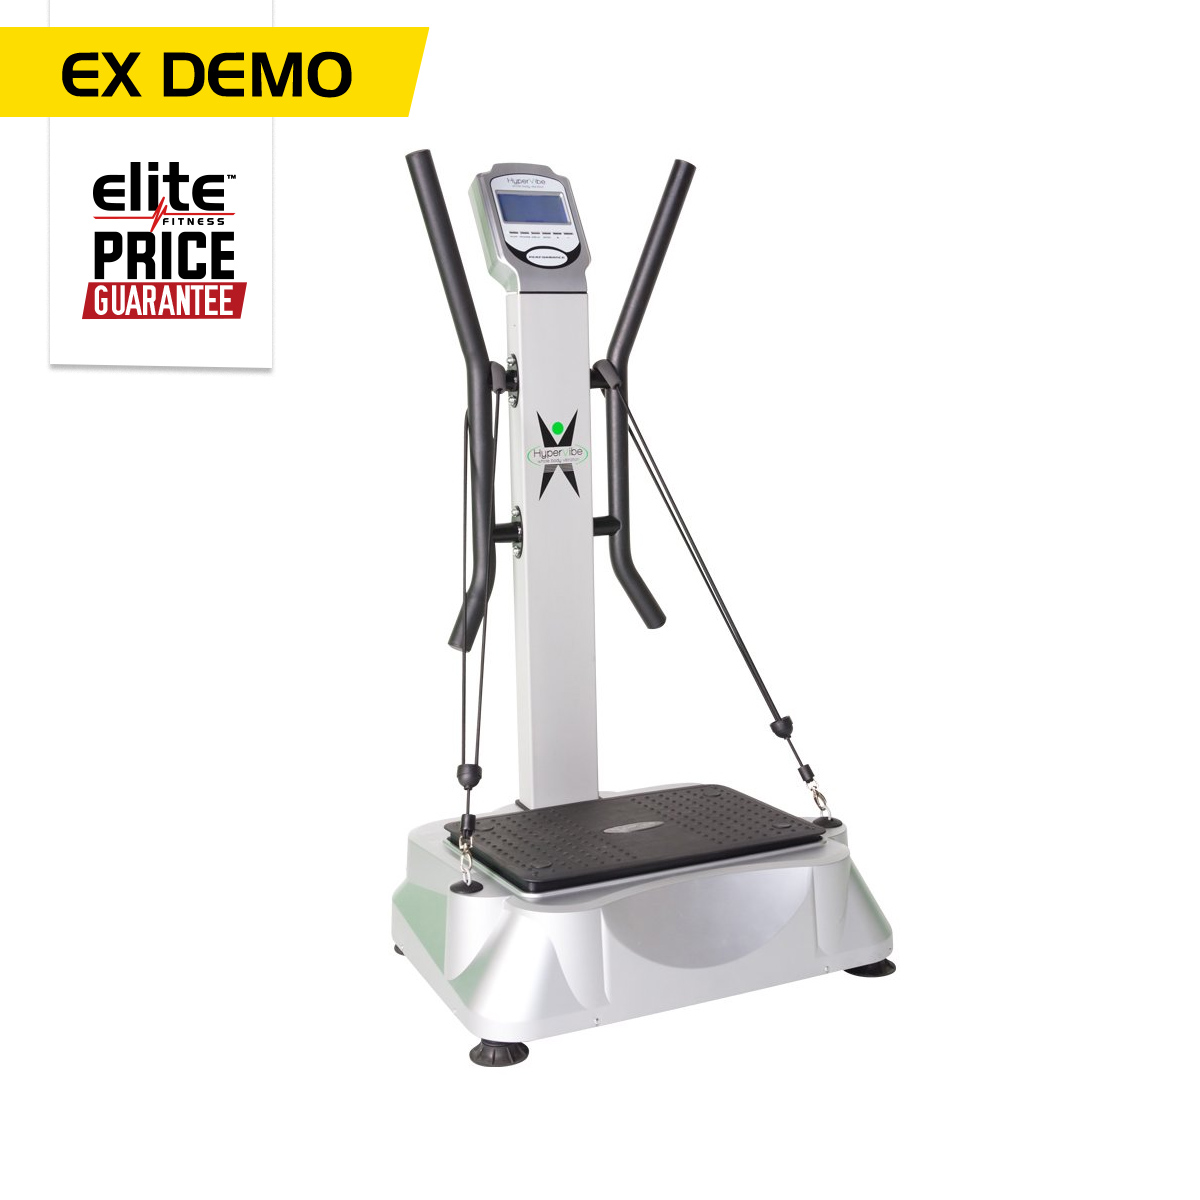 PERFORMANCE WHOLE BODY VIBRATION MACHINE TRADE IN - AVAILABLE AT ROSEBANK